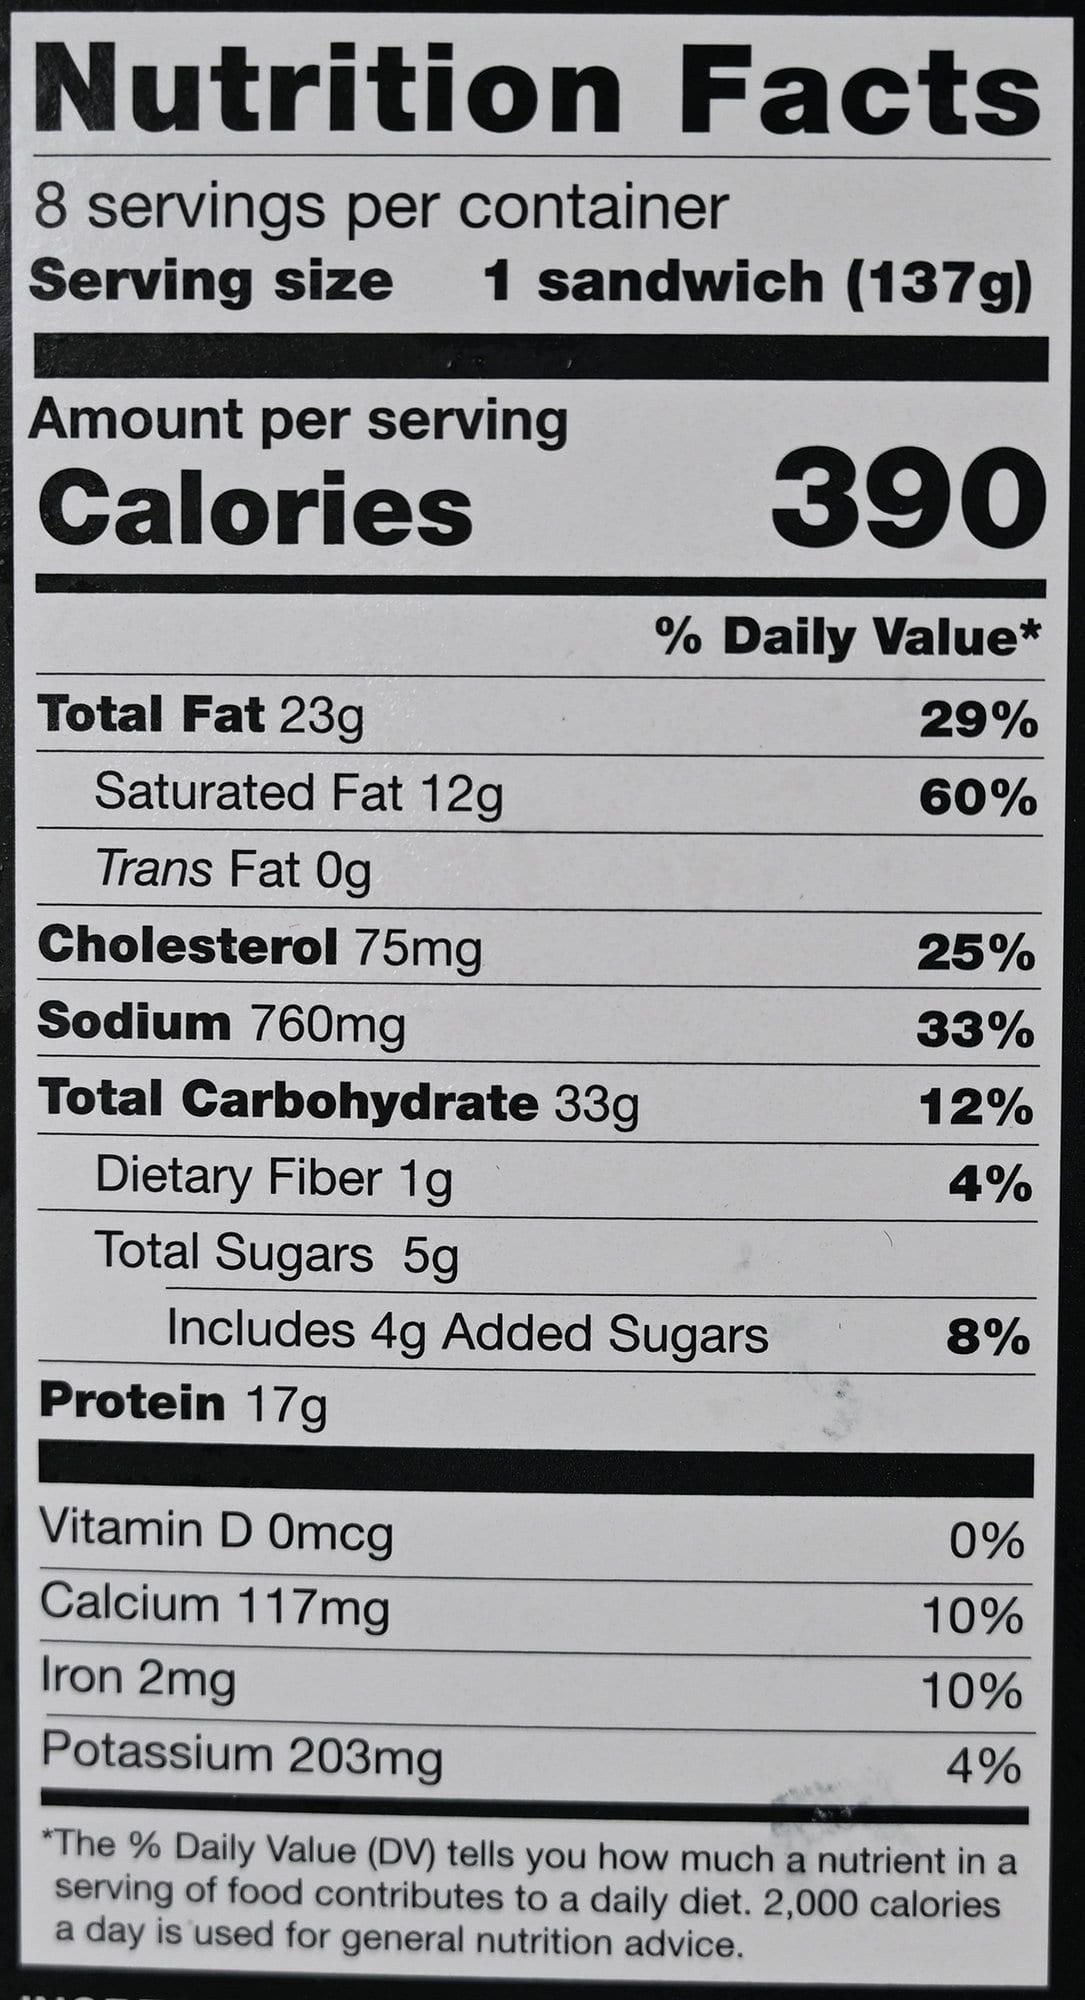 Image of the nutrition facts for the Kirkland Signature Breakfast Sandwich from the back of the box.